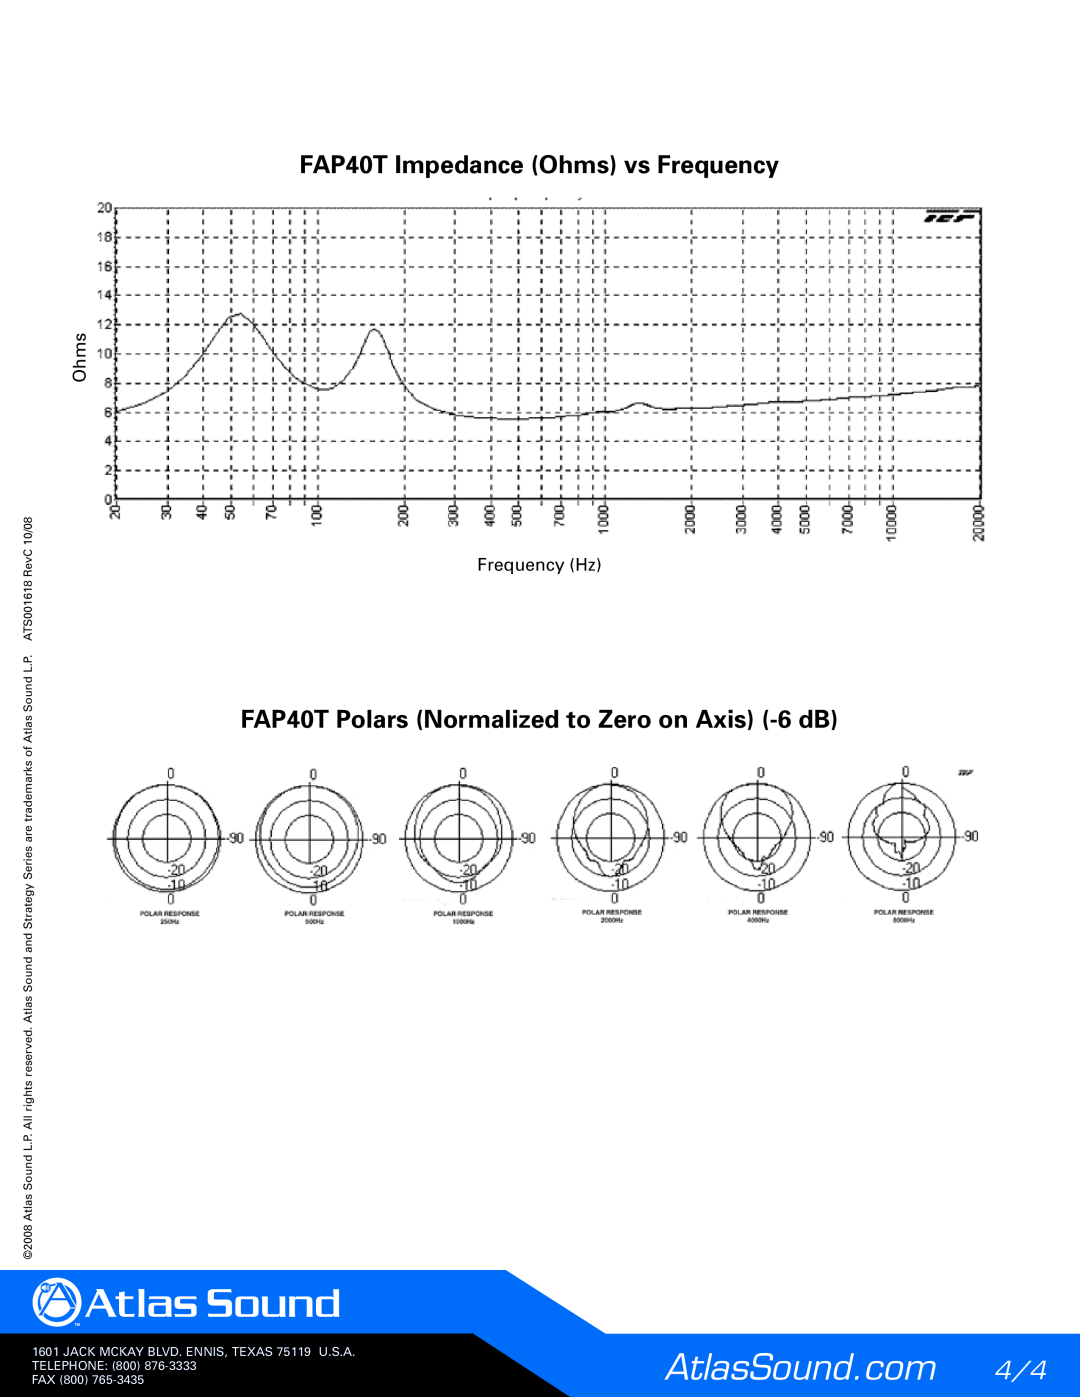 Atlas Sound FAP40T Impedance Ohms vs Frequency, FAP40T Polars Normalized to Zero on Axis -6dB, Frequency Hz, Fax 